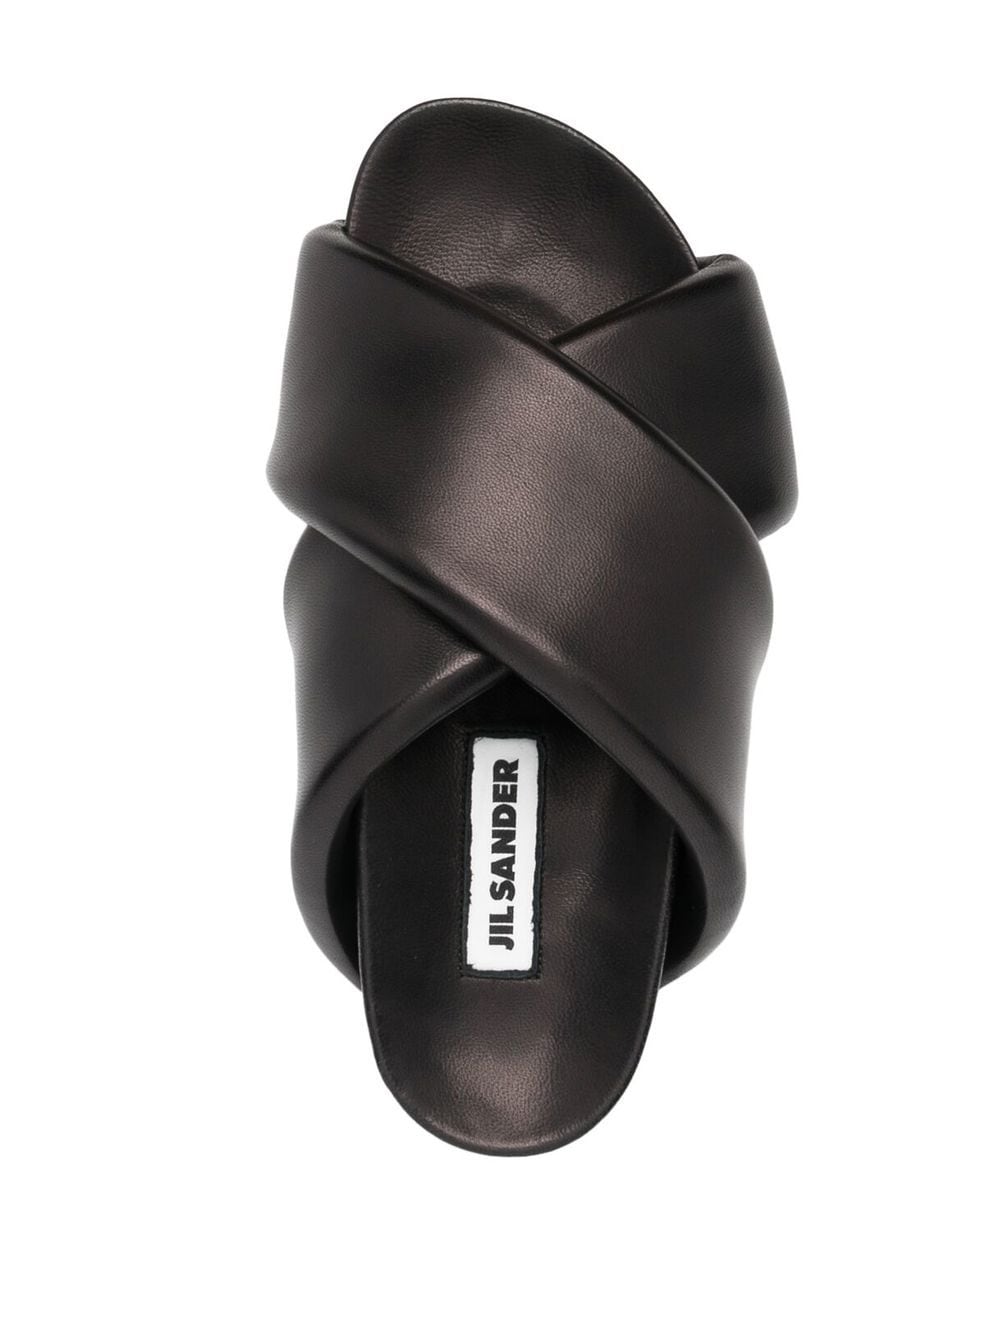 Band Sandal In Black Leather